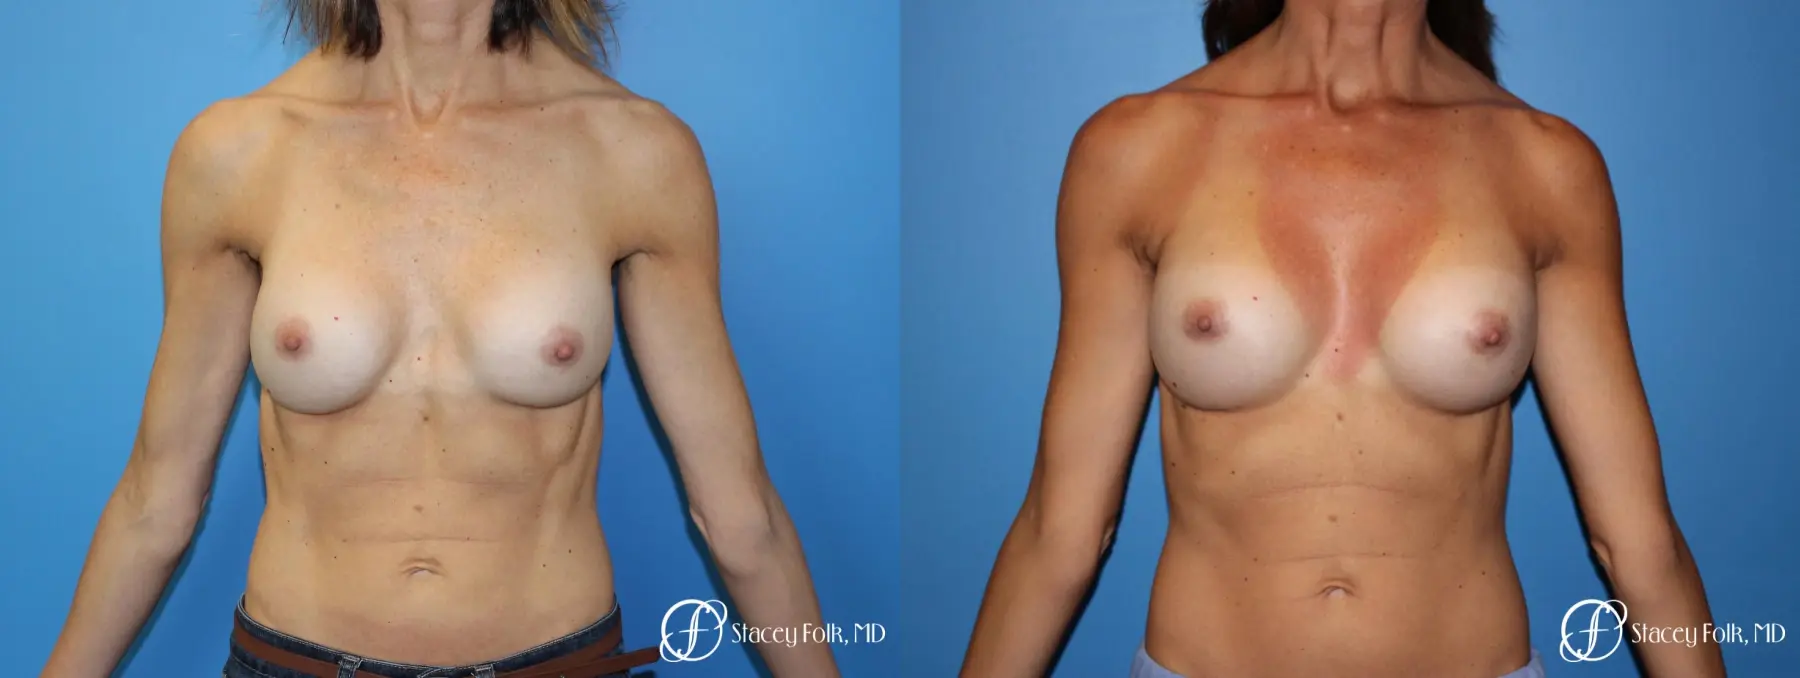 Denver Breast Revision 8504 - Before and After